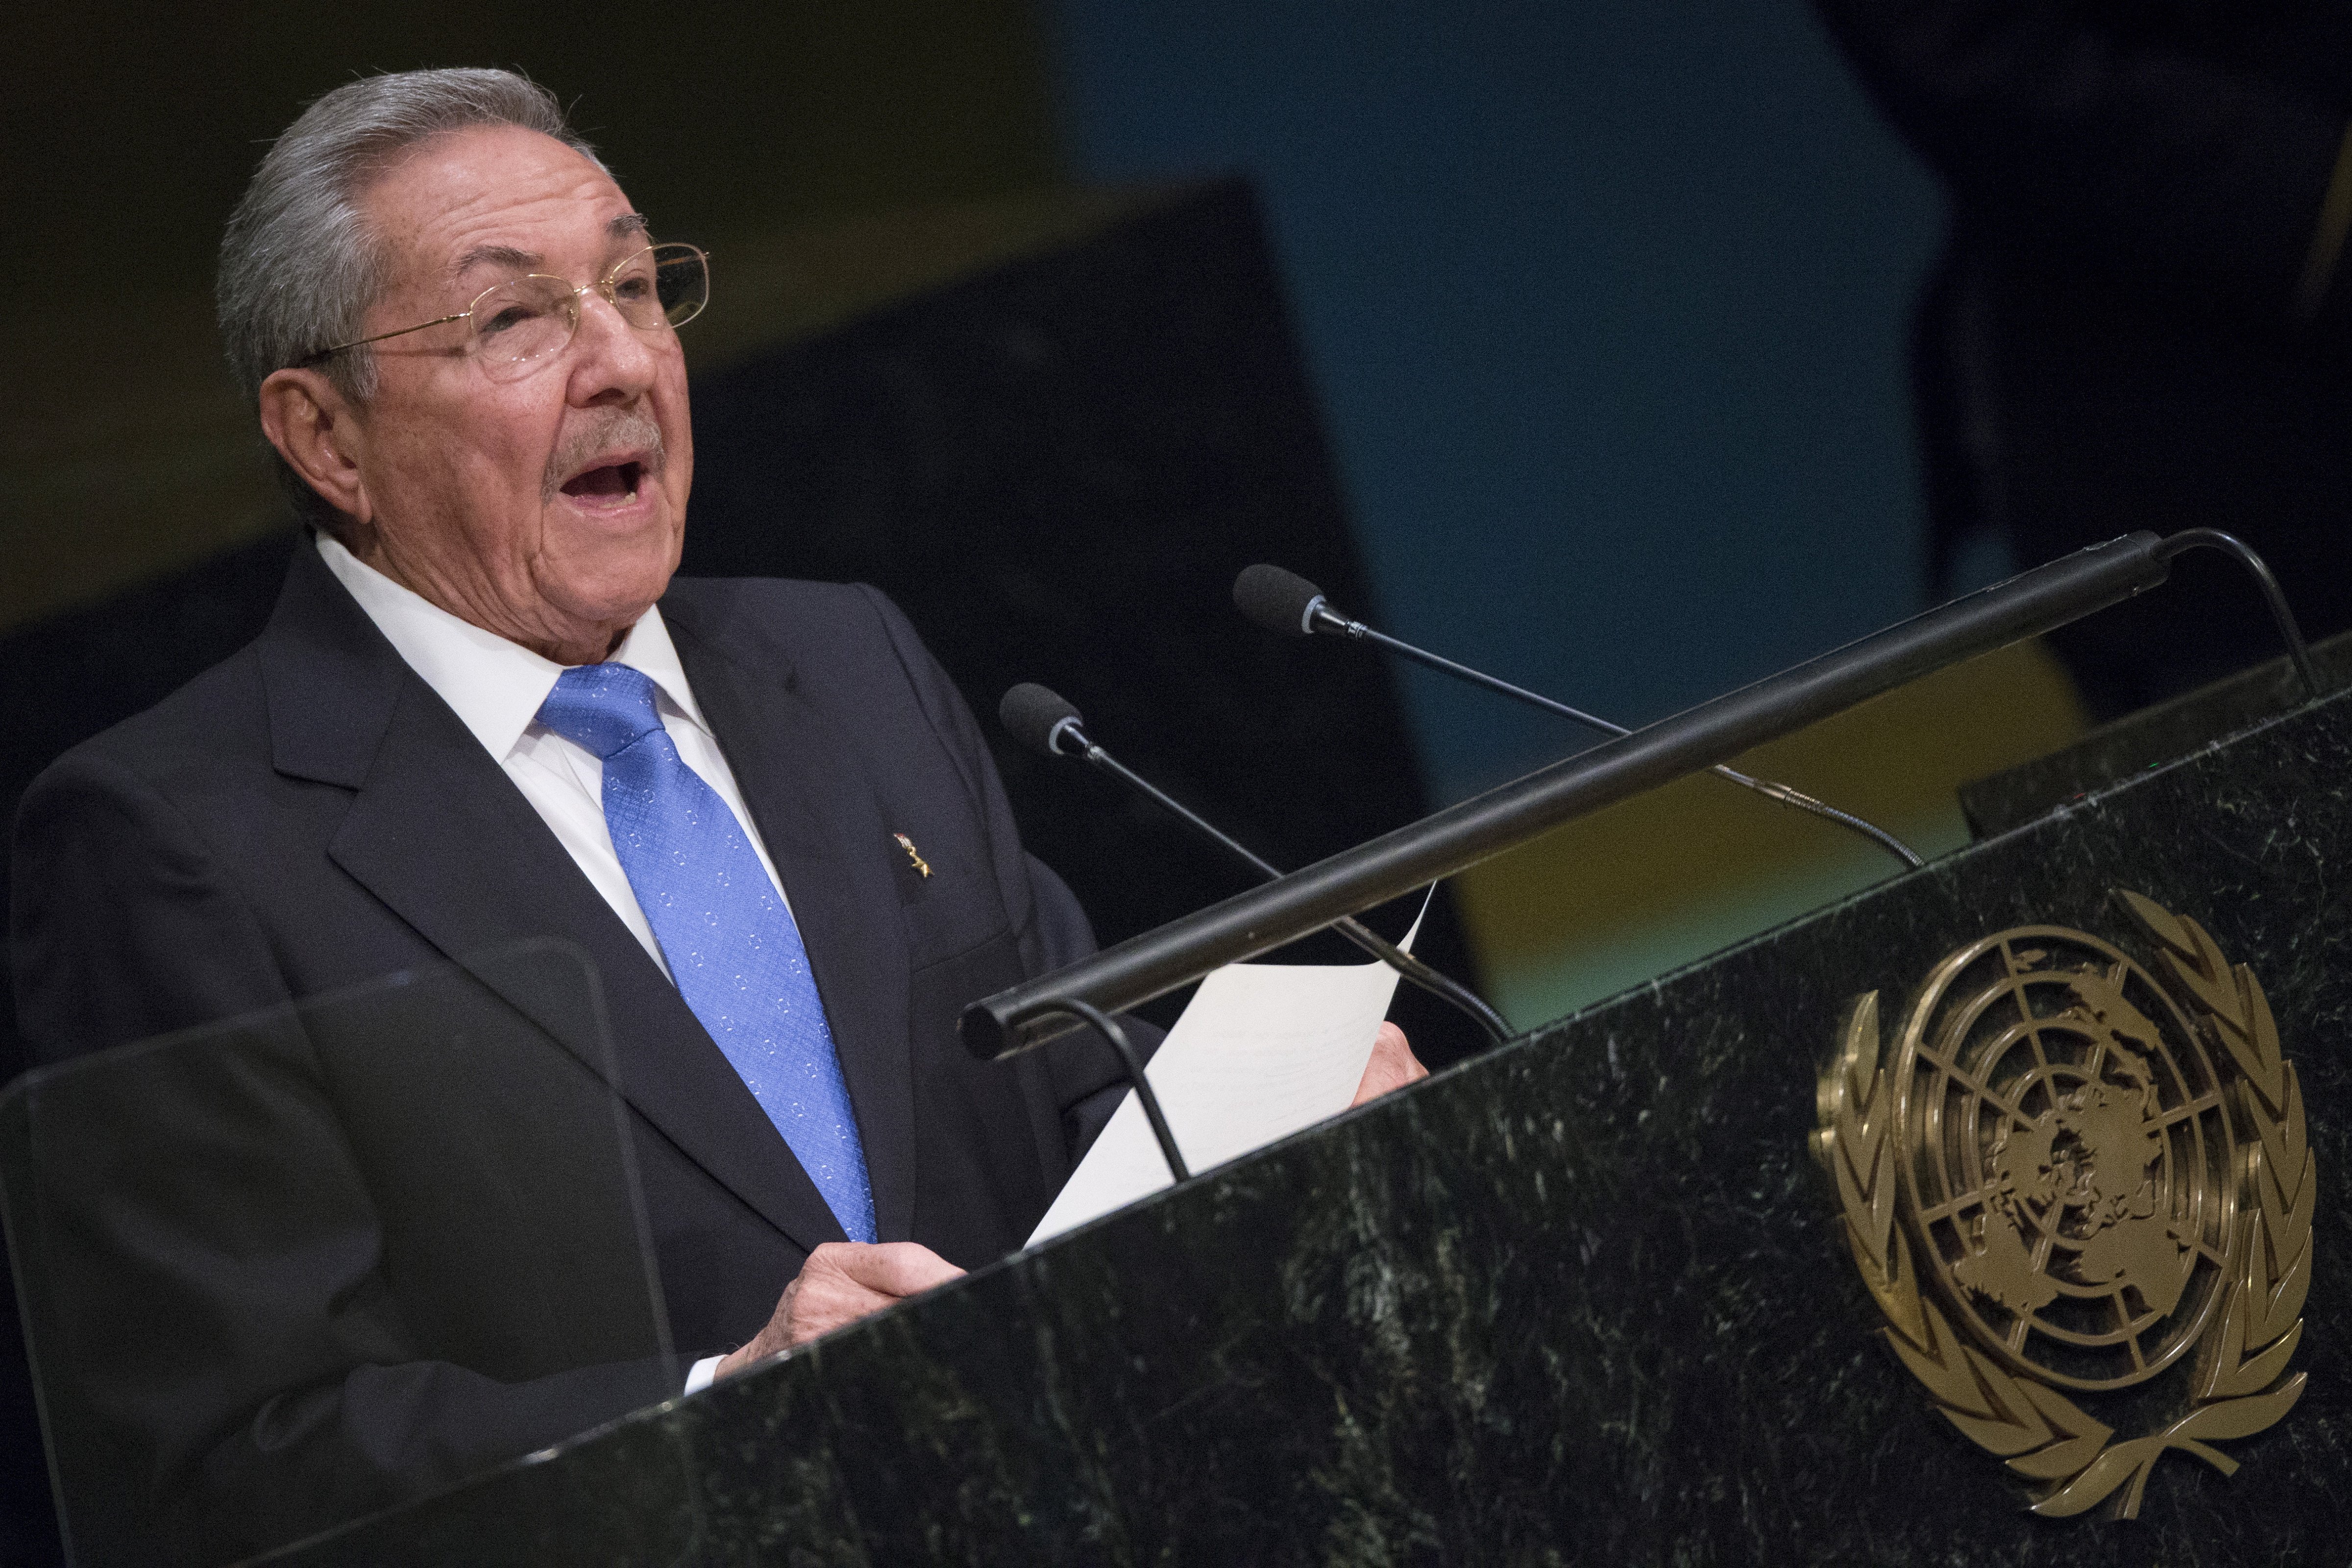 Cuban President Raul Castro addresses attendees during the 70th session of the United Nations General Assembly at the U.N. headquarters in New York September 28, 2015. (Carlo Allegri—Reuters)